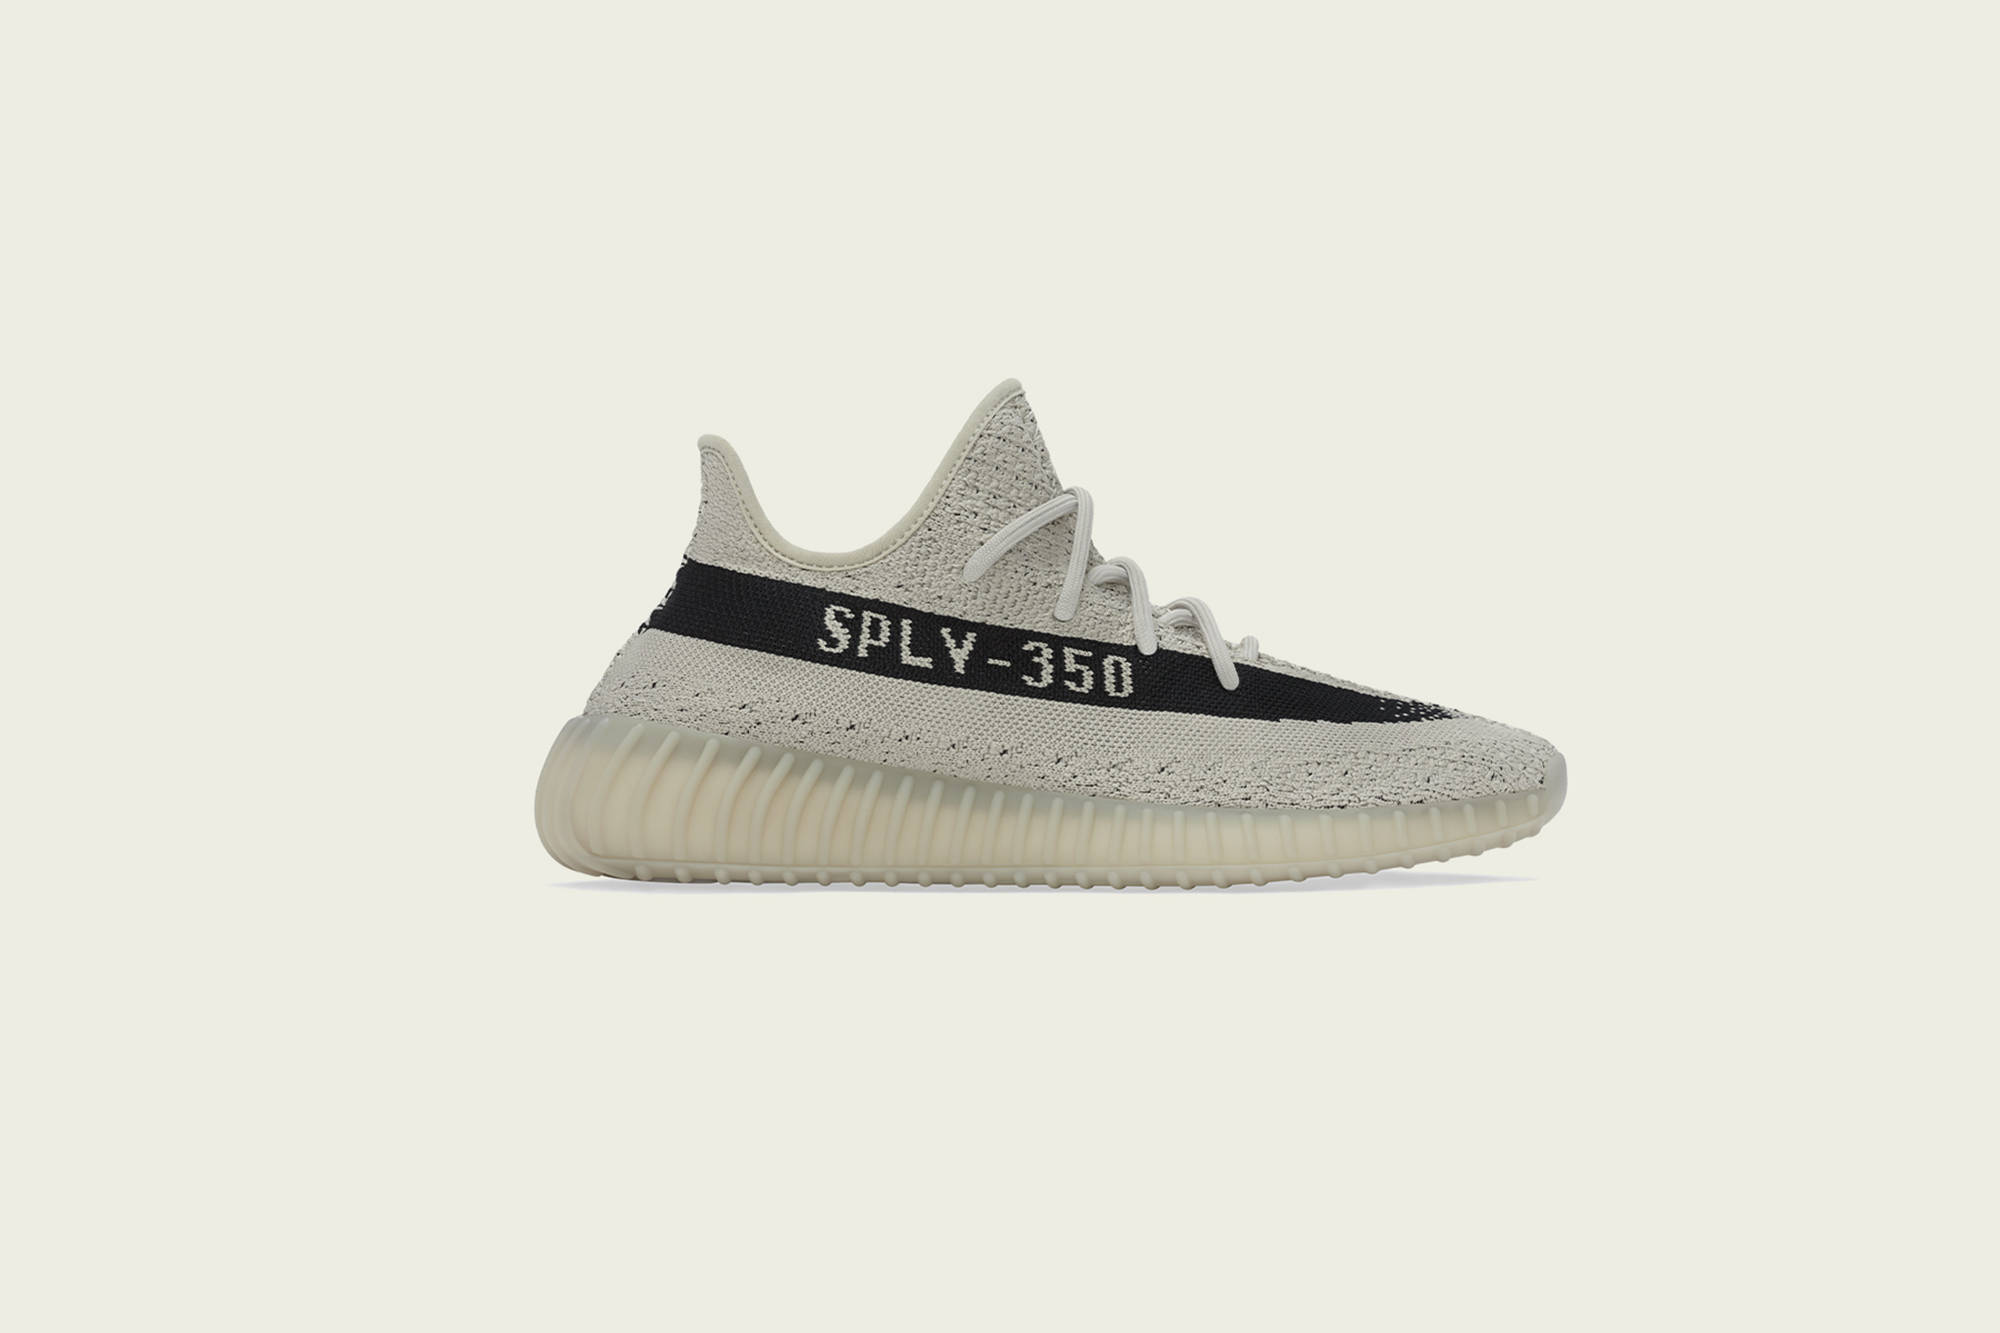 Adidas Yeezy Boost 350 V2 Slate Core Black Online Entry Form